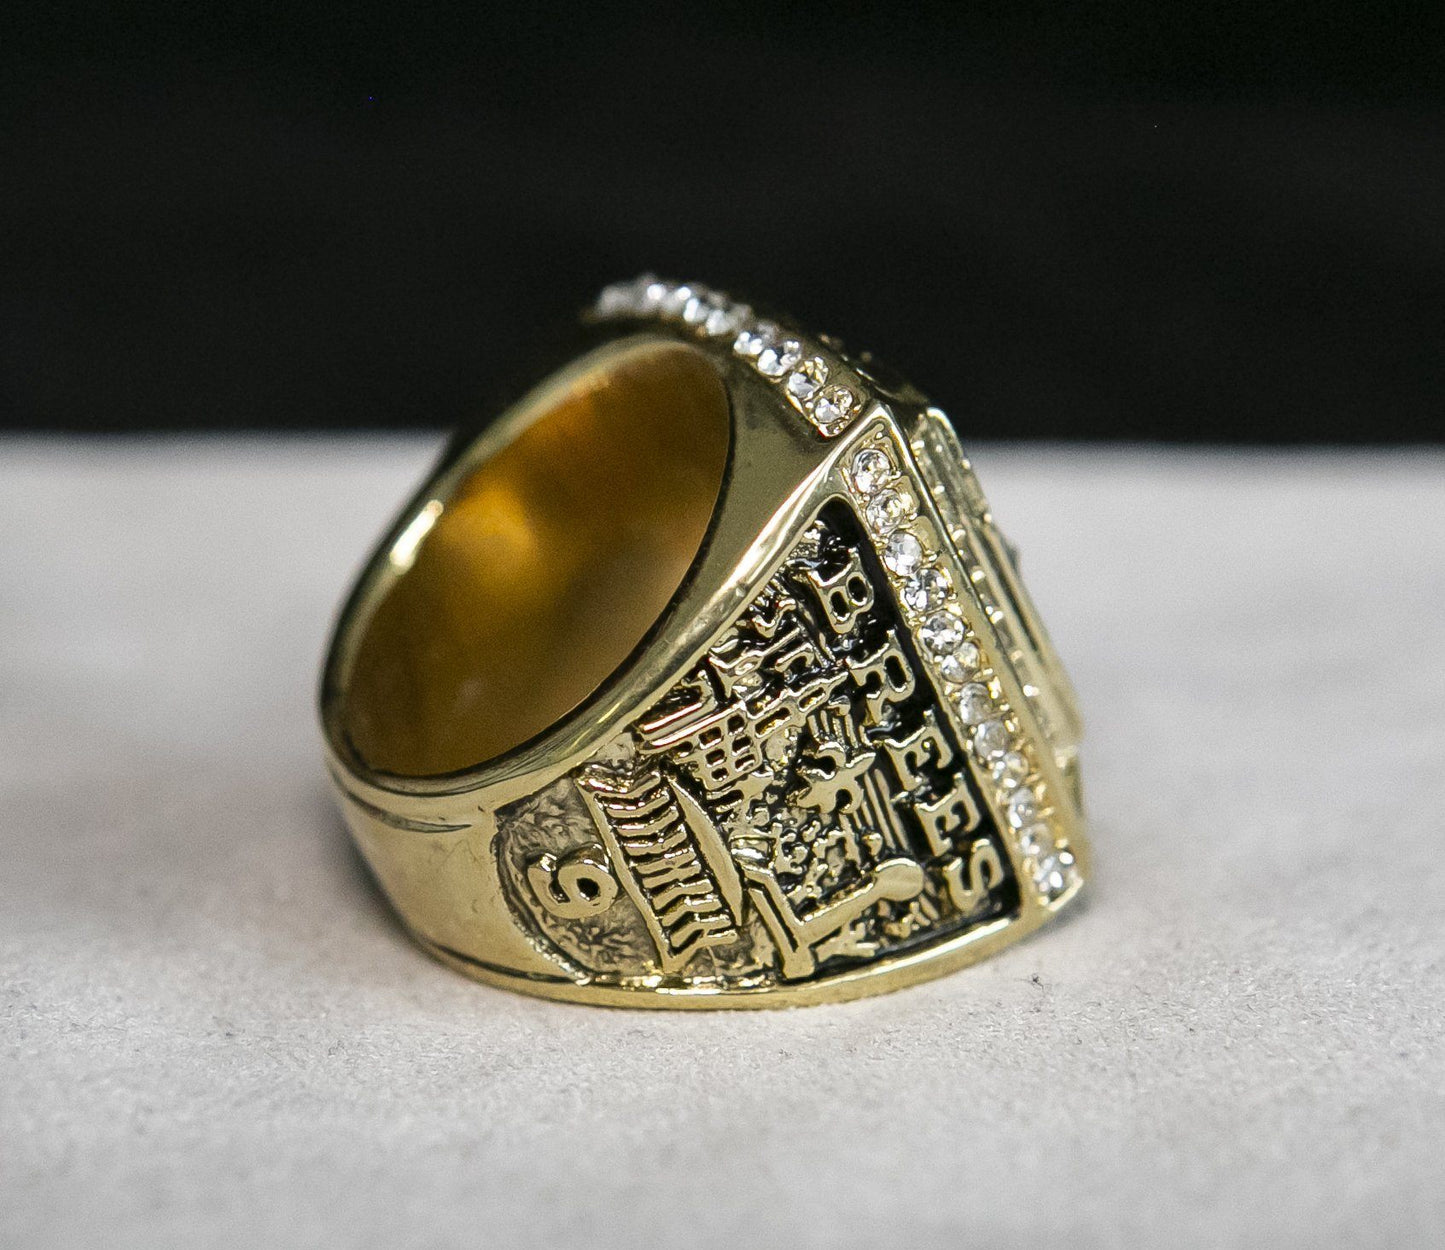 New Orleans Saints Super Bowl Ring (2009) – Rings For Champs